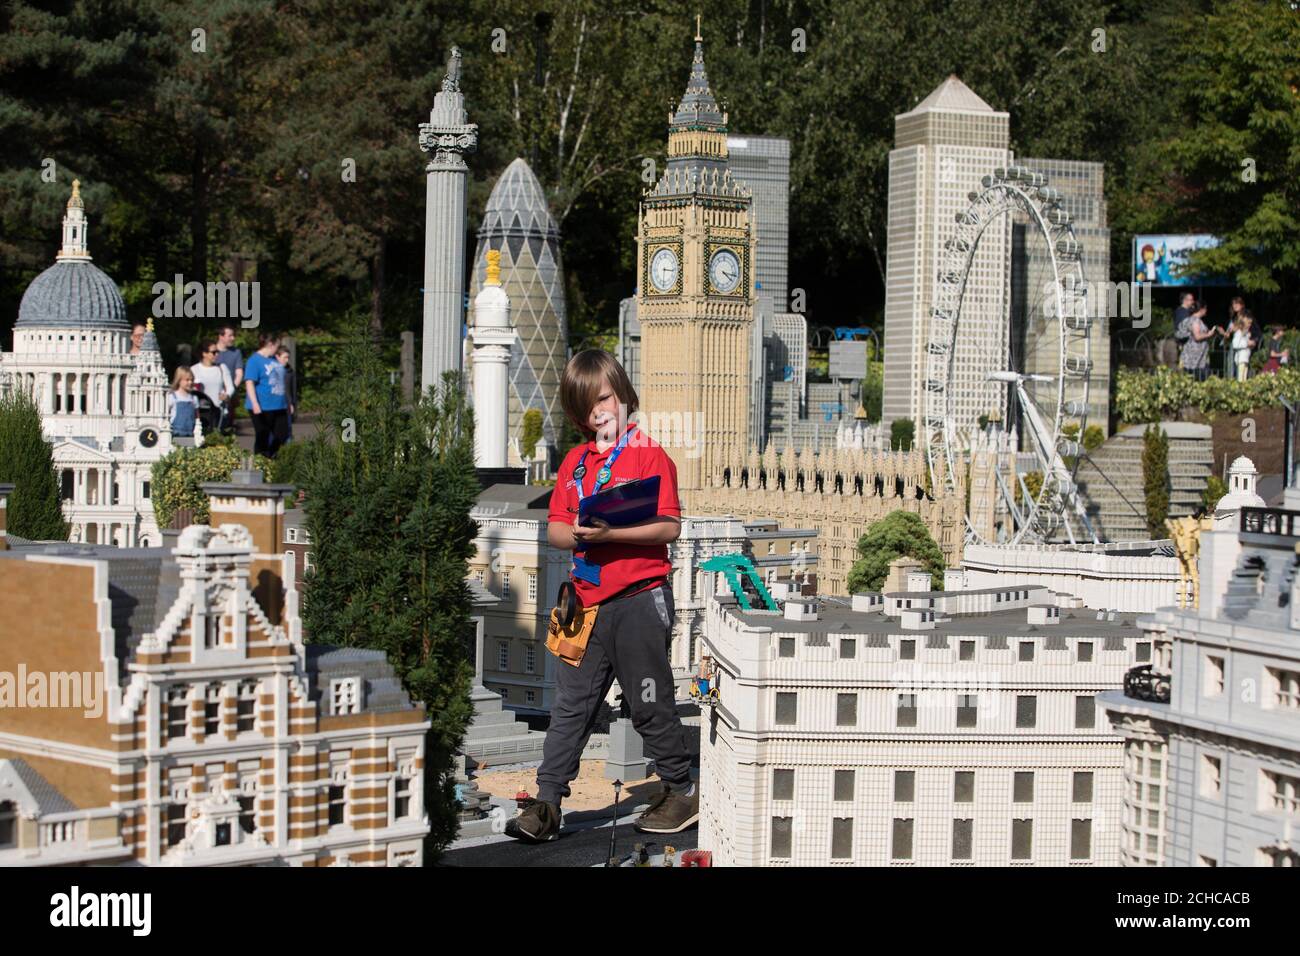 EDITORIAL USE ONLY Stanley Bolland, six, from Hampshire, undertakes some work experience as a 'Model Maker' at the Legoland Windsor Resort in Berkshire, after writing a letter applying for a job he saw advertised at the attraction in his local newspaper. PRESS ASSOCIATION. Issue date: Sunday September 3, 2017. Photo credit should read: David Parry/PA Wire Stock Photo